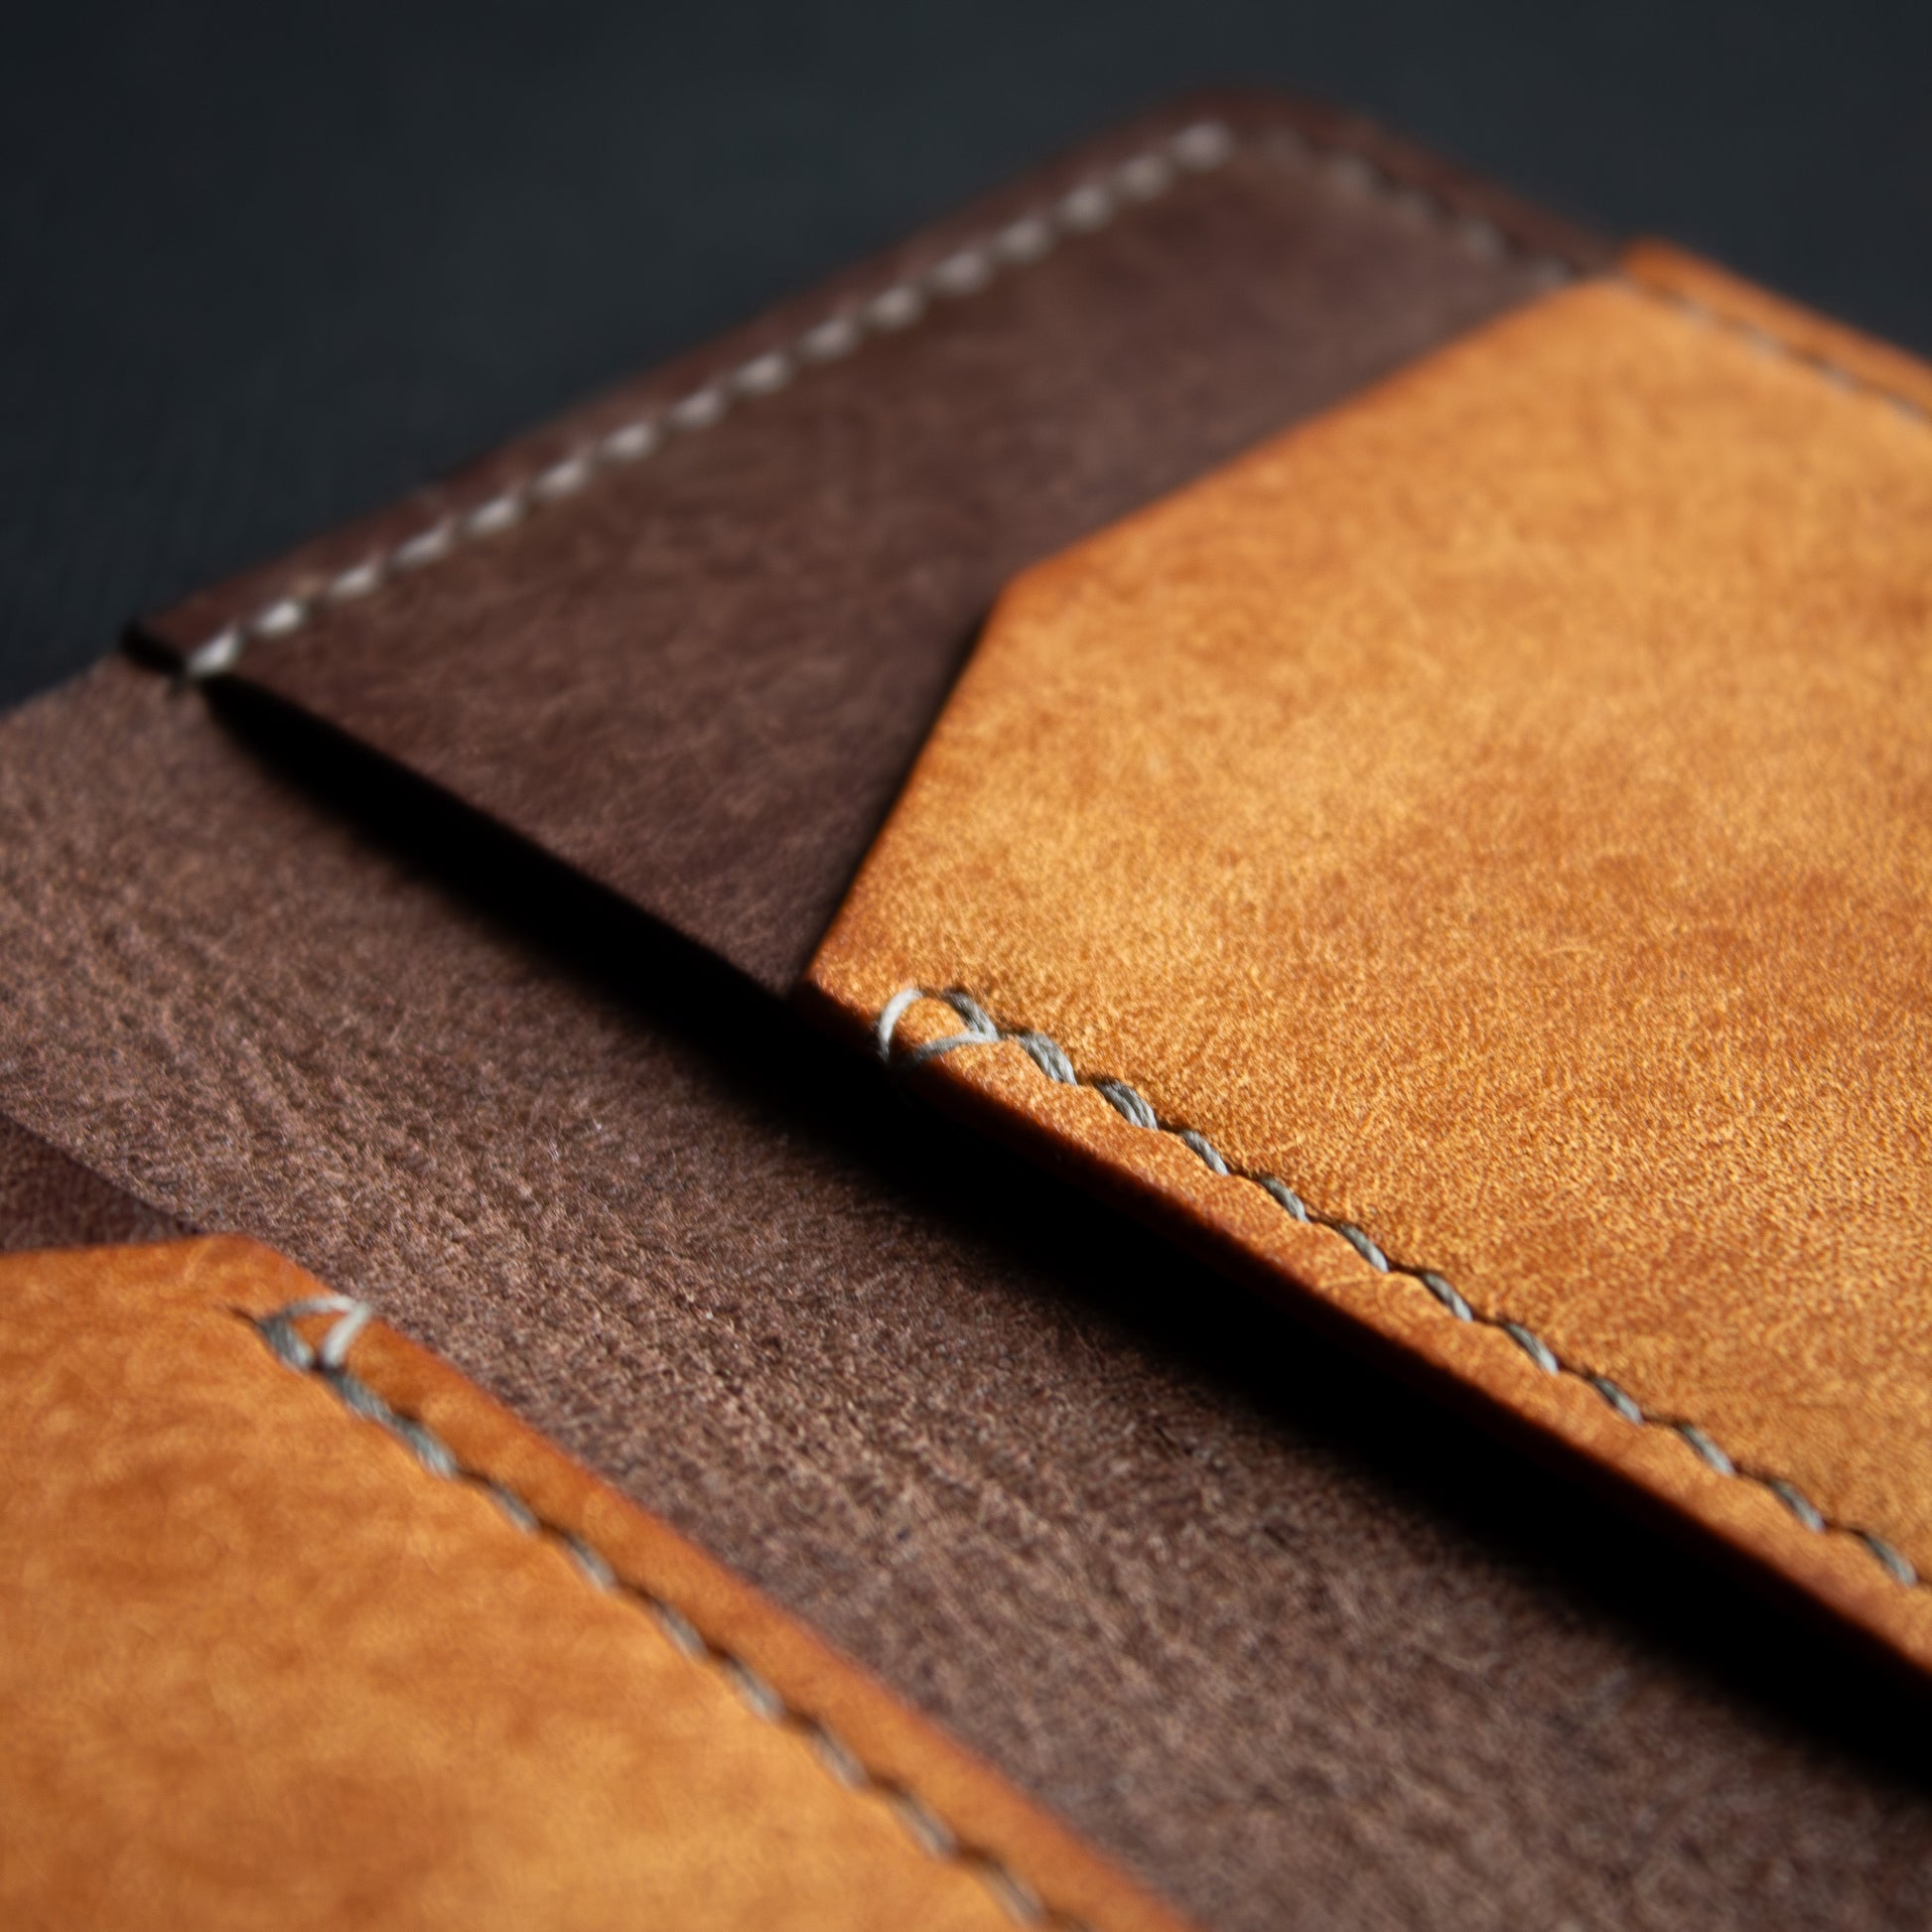 handcrafted brown leather wallet ontop of black background - open leather cardholder - Badalassi Carlo Pueblo Cognac and Castagno leather - close up saddle stich with grey xiange thread 